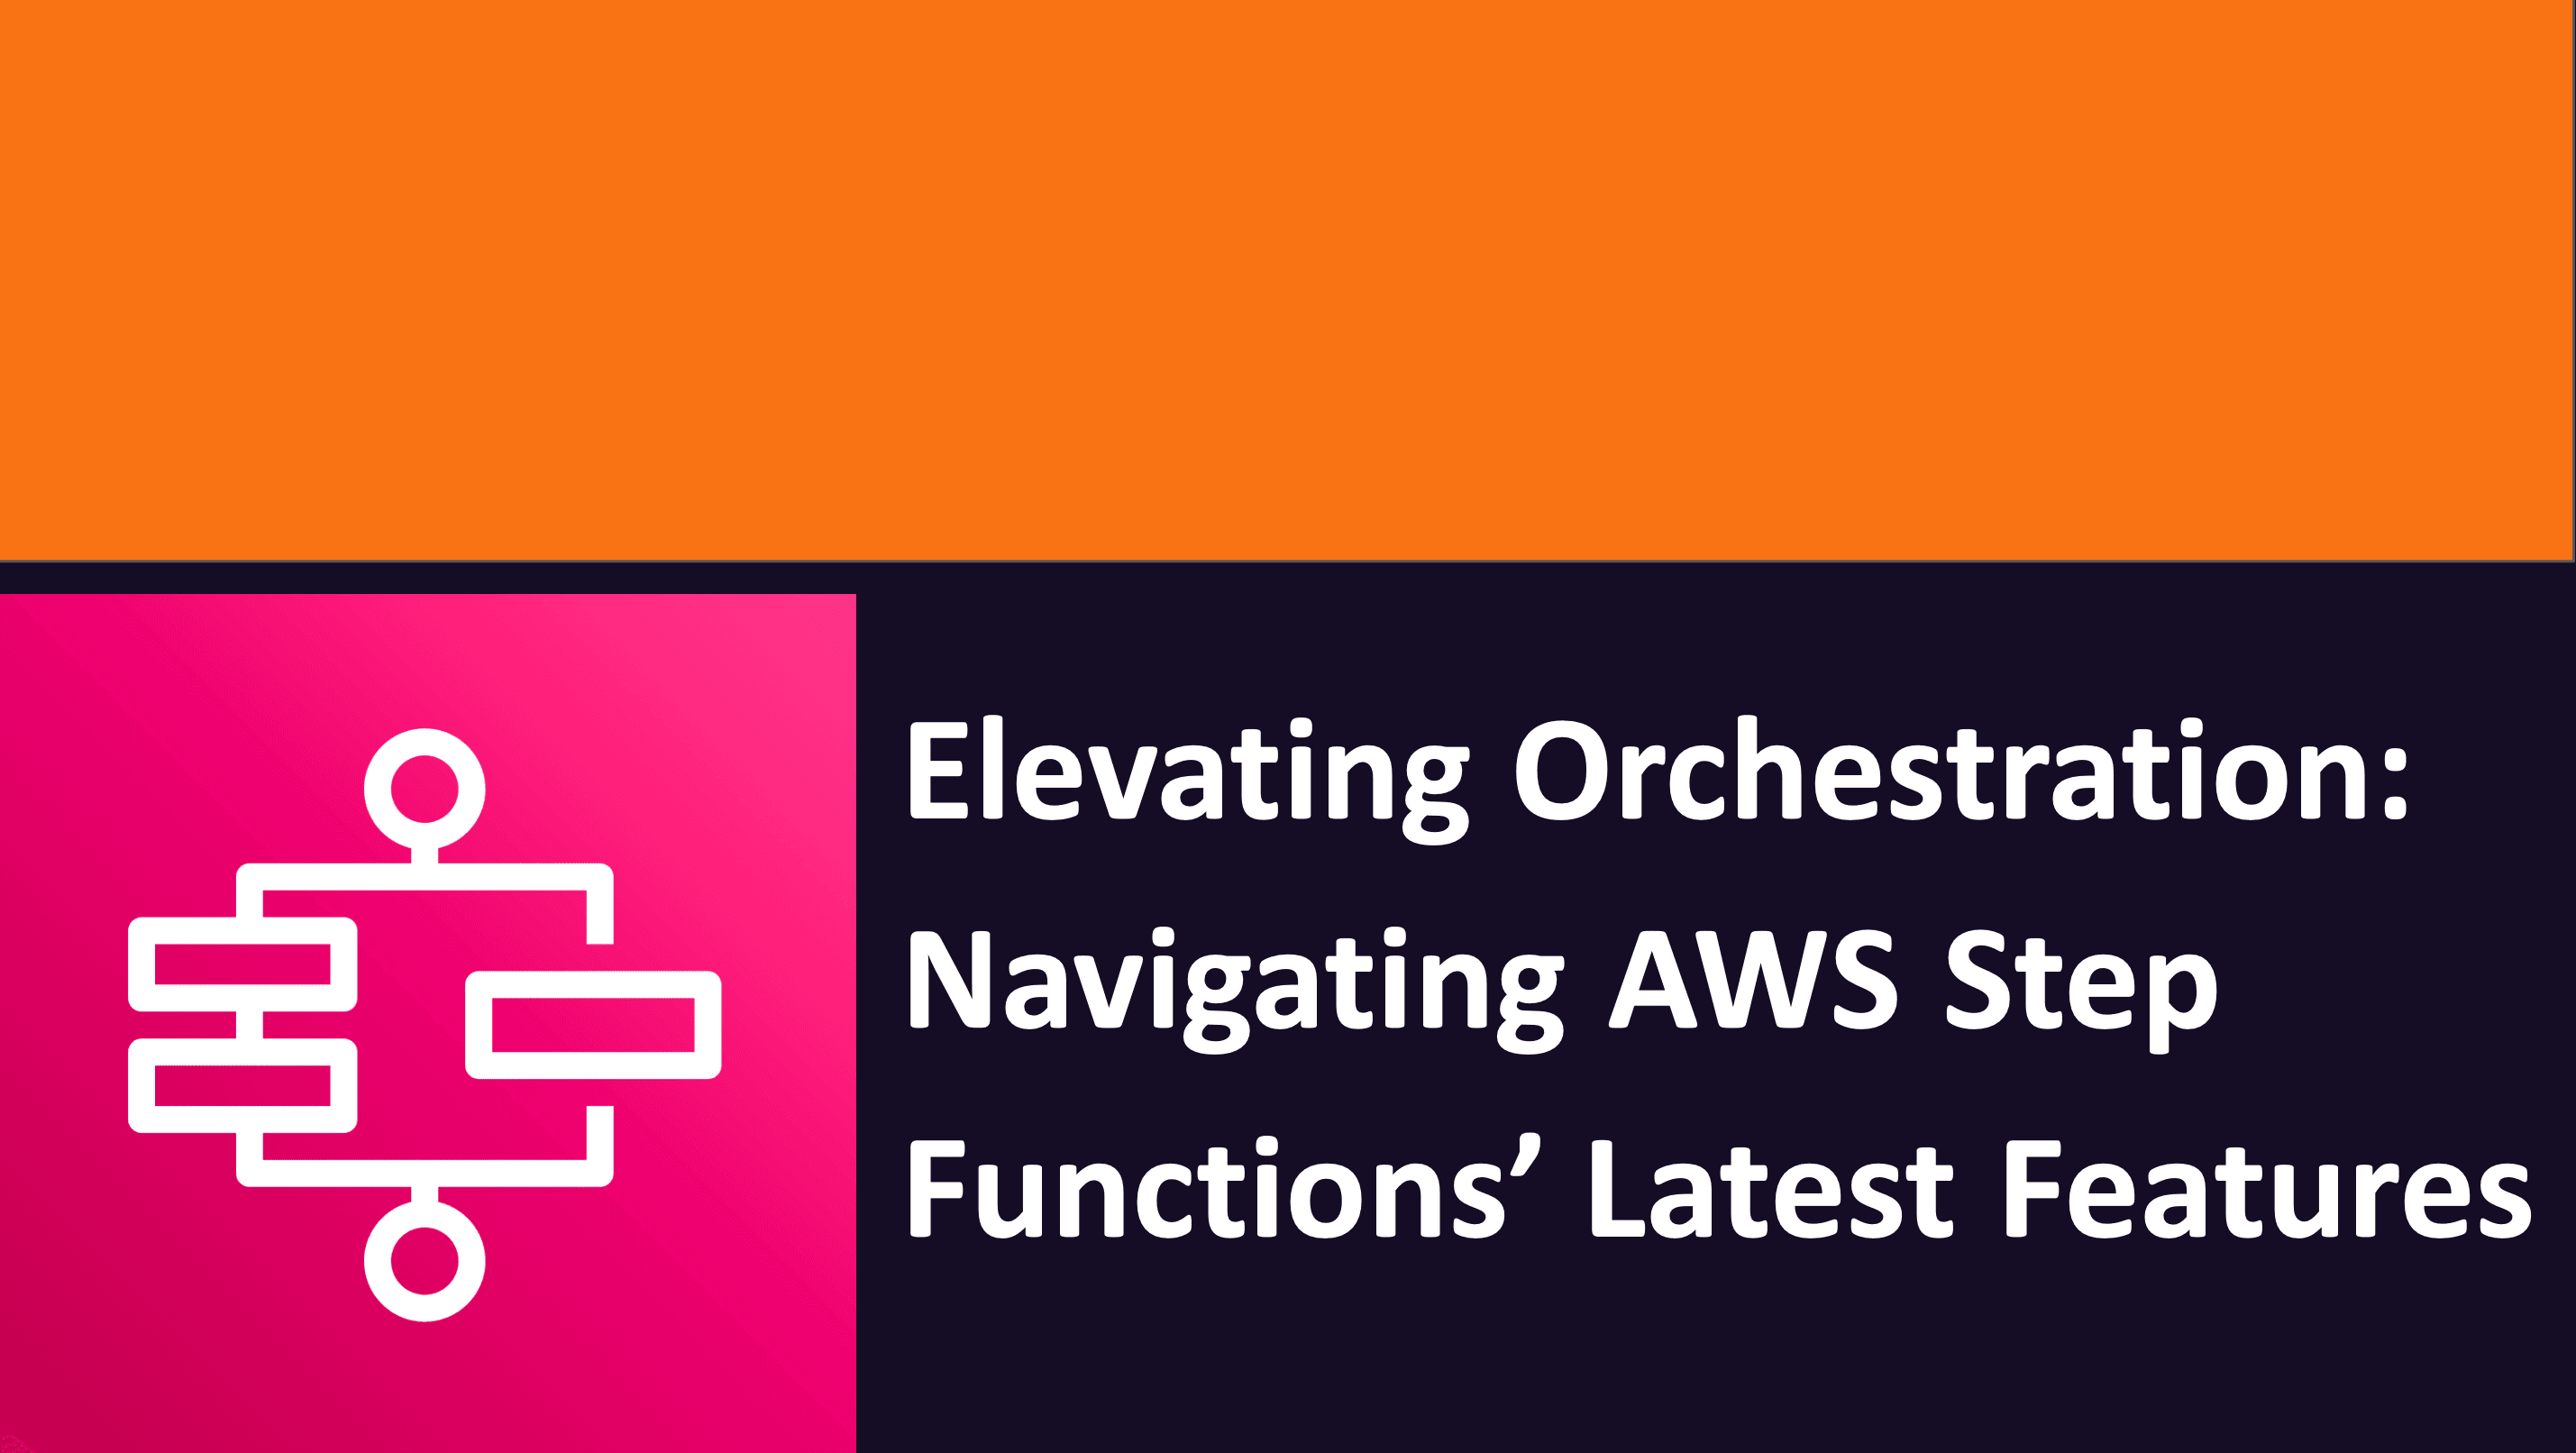 Elevating Orchestration: Navigating AWS Step Functions' Latest Features